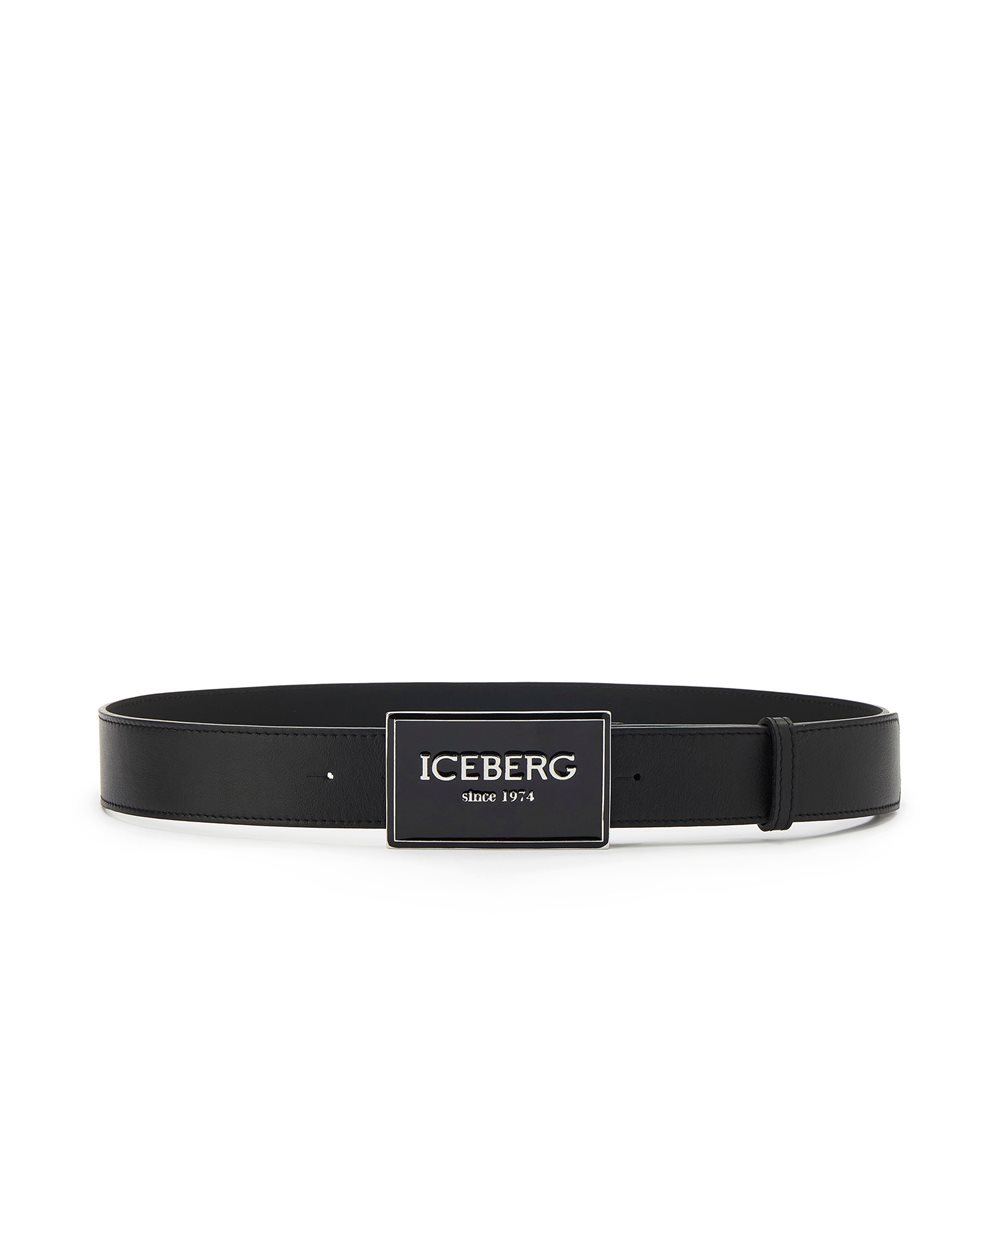 Leather belt with logoed buckle - ( SECONDO STEP IT ) PROMO SALDI UP TO 40% | Iceberg - Official Website